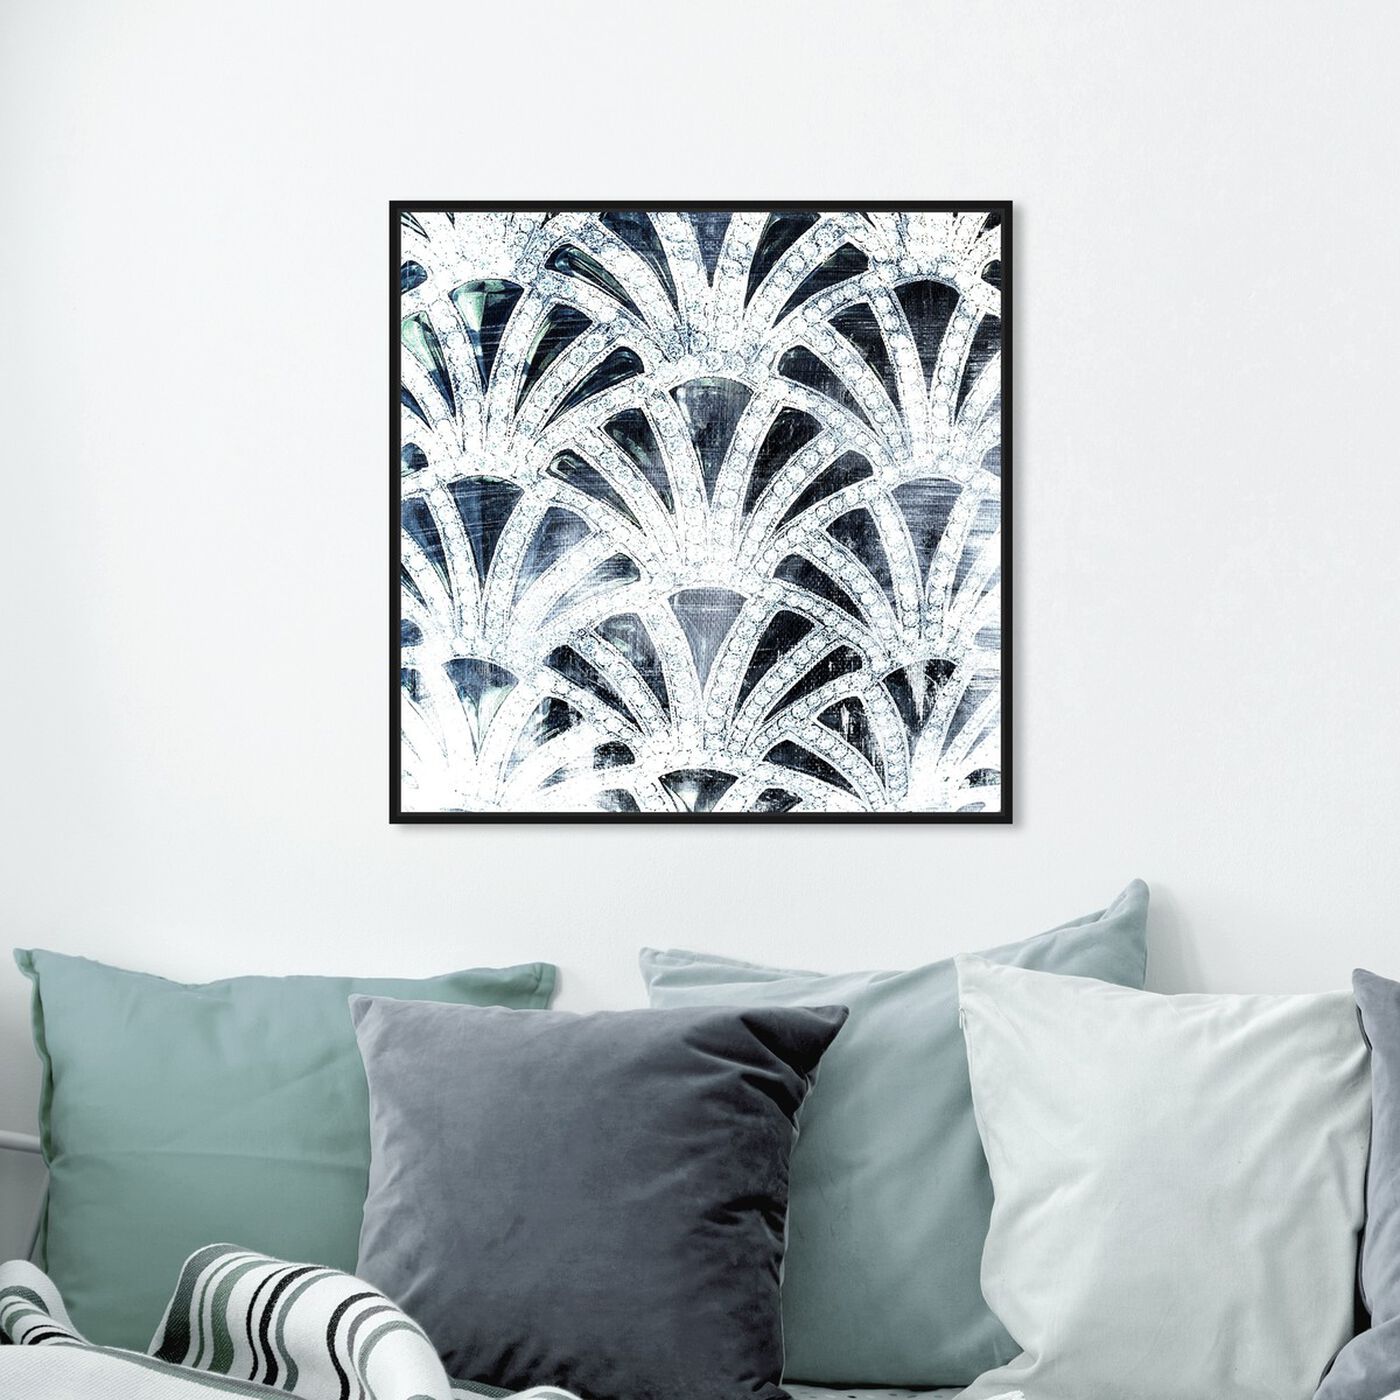 Hanging view of Diamonds Deco featuring abstract and patterns art.